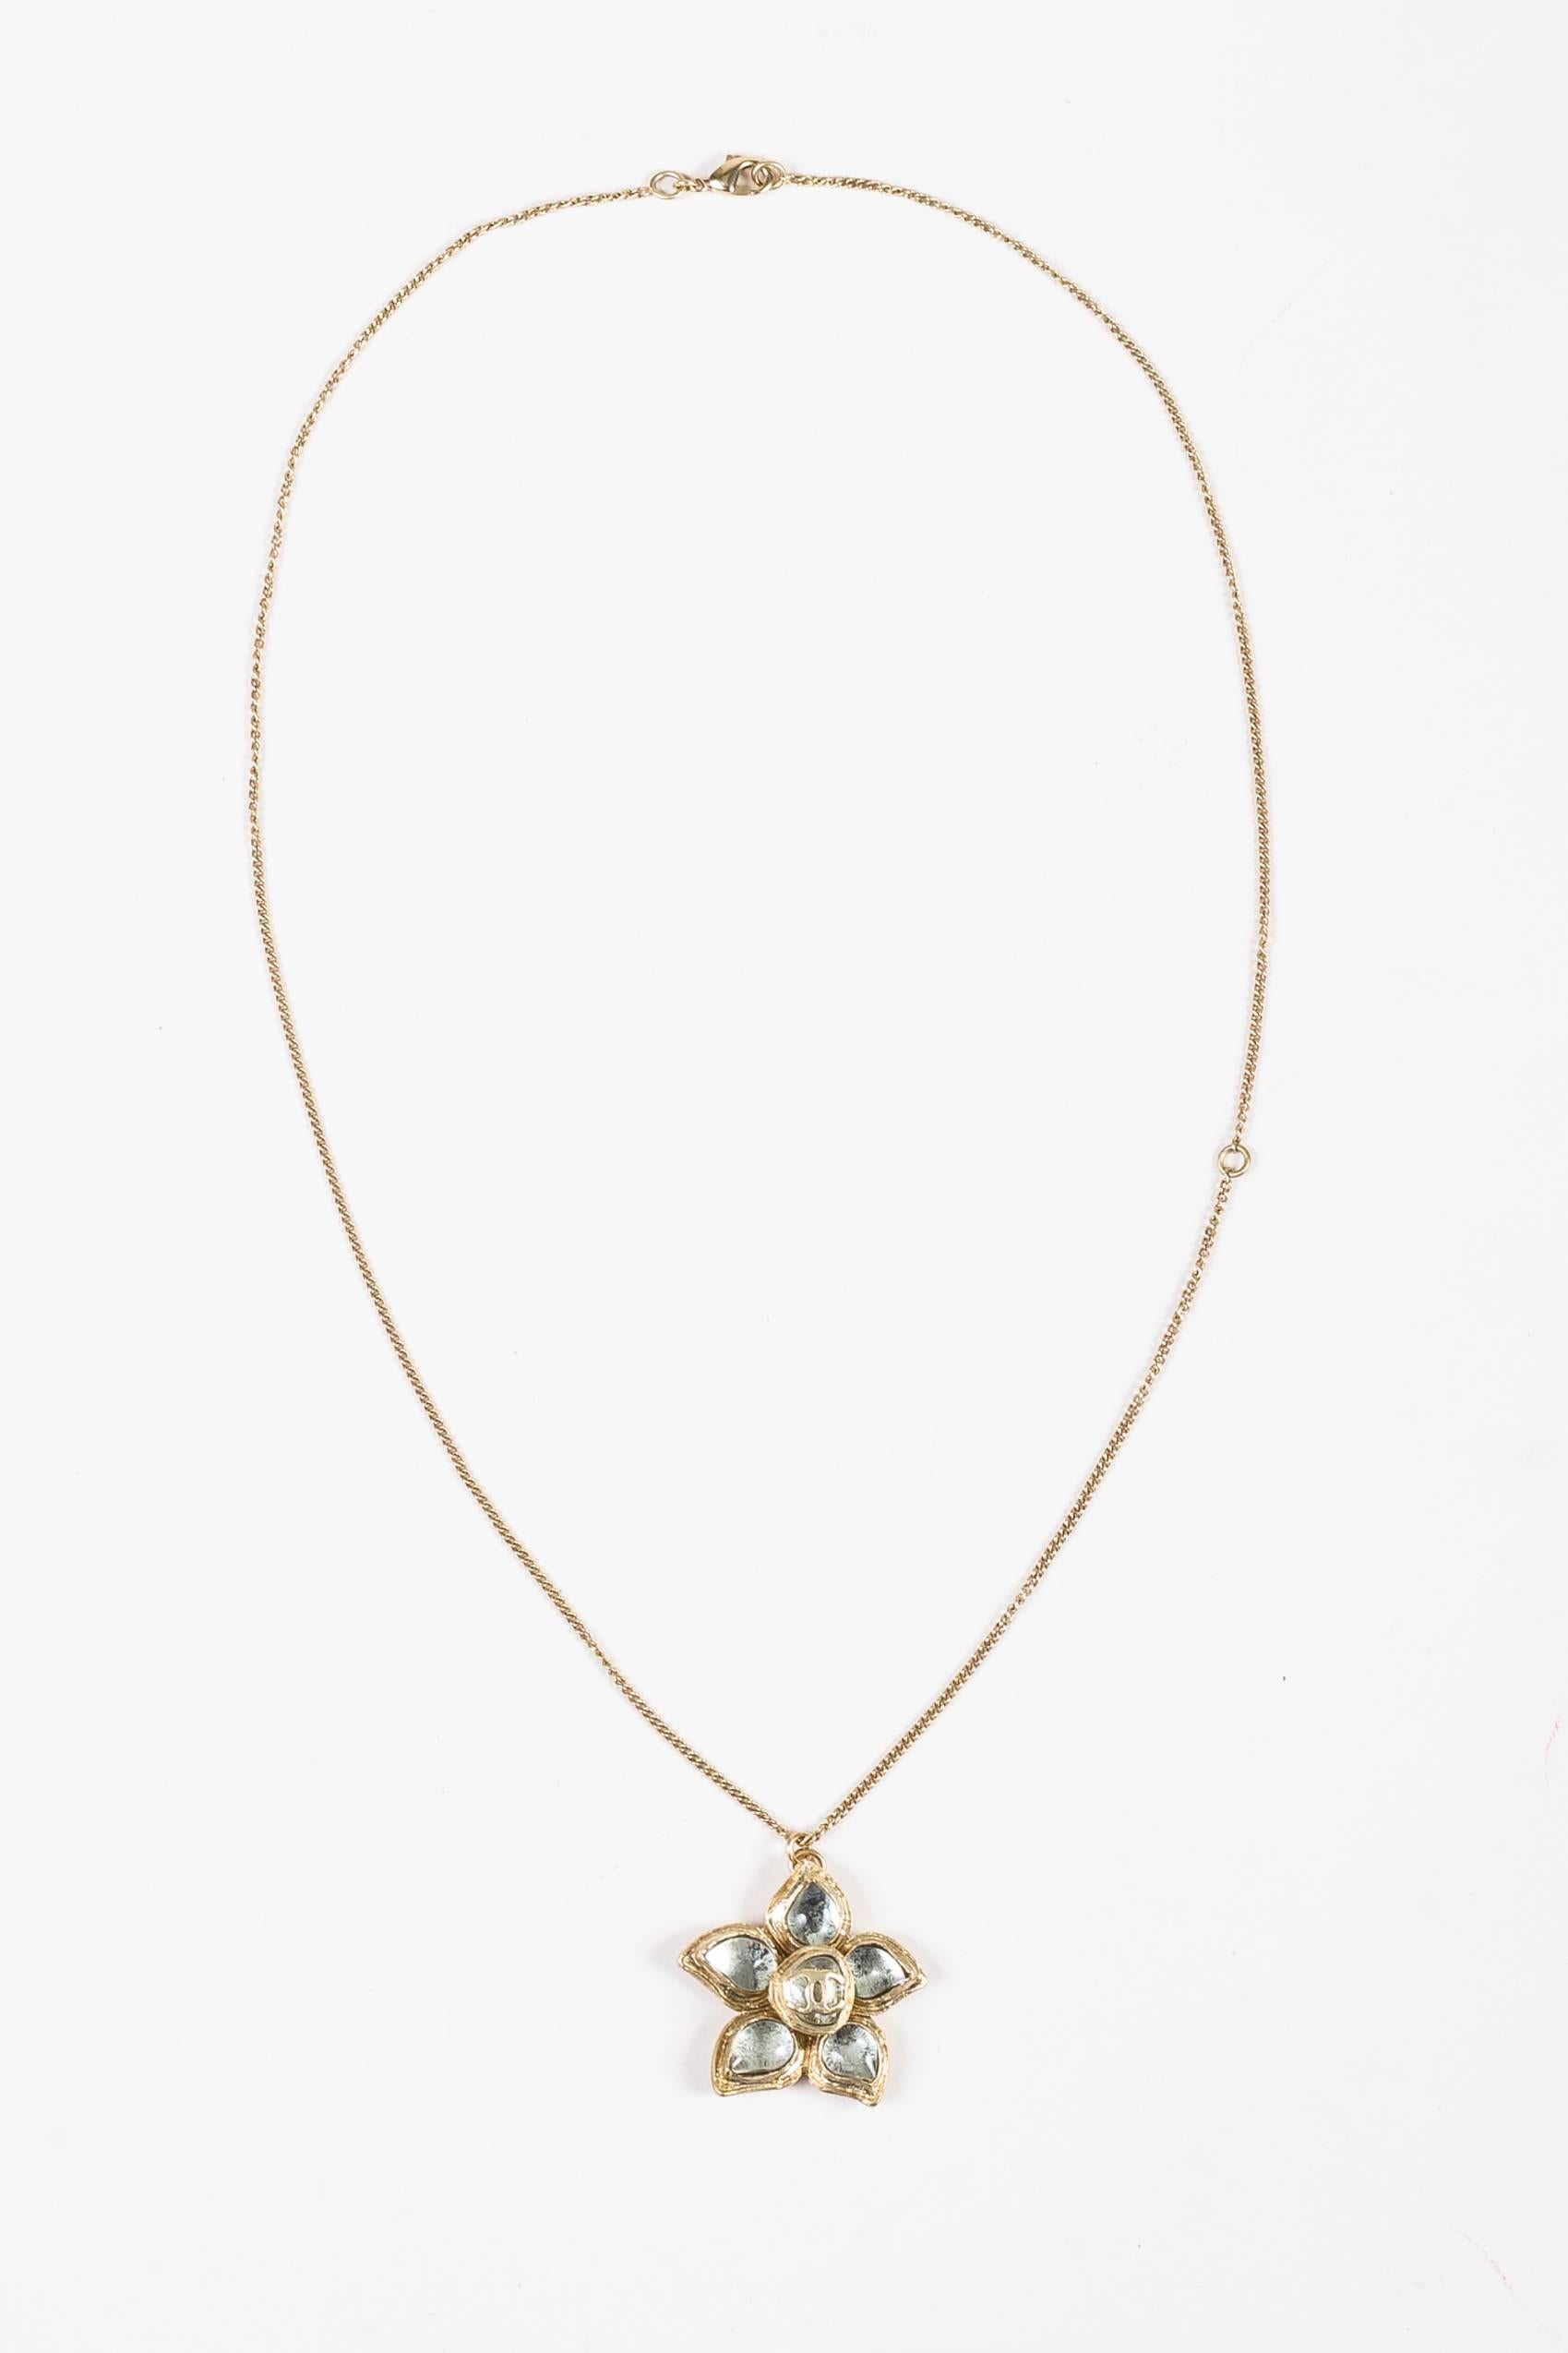 Beautifully constructed necklace for simple elegance. From the fall 2012 collection. Light gold-tone hardware. Curb link chain. Signature camellia flower shaped pendant with clear gripoix petals. Center 'CC' logo accent. Lobster claw clasp